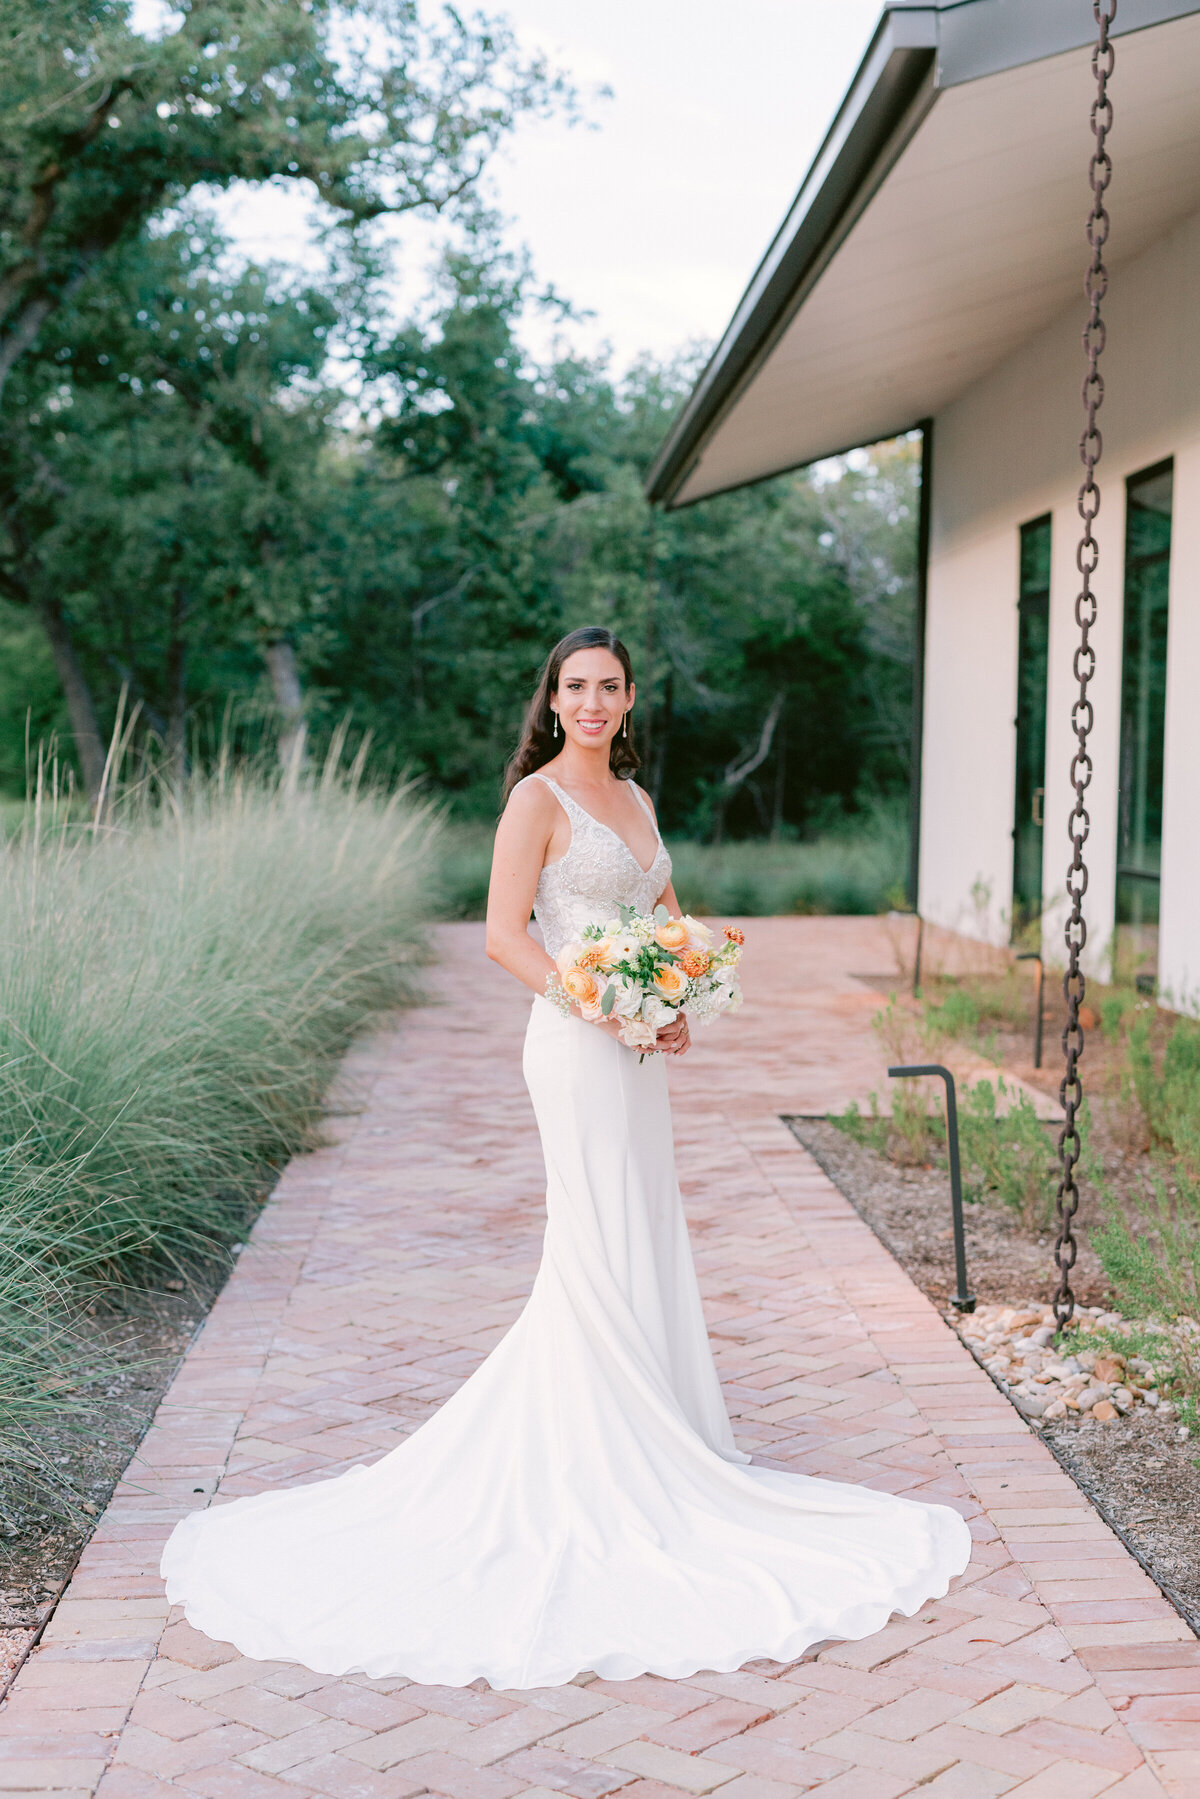 Bridal portraits in the grounds of the The Grand Lady Austin